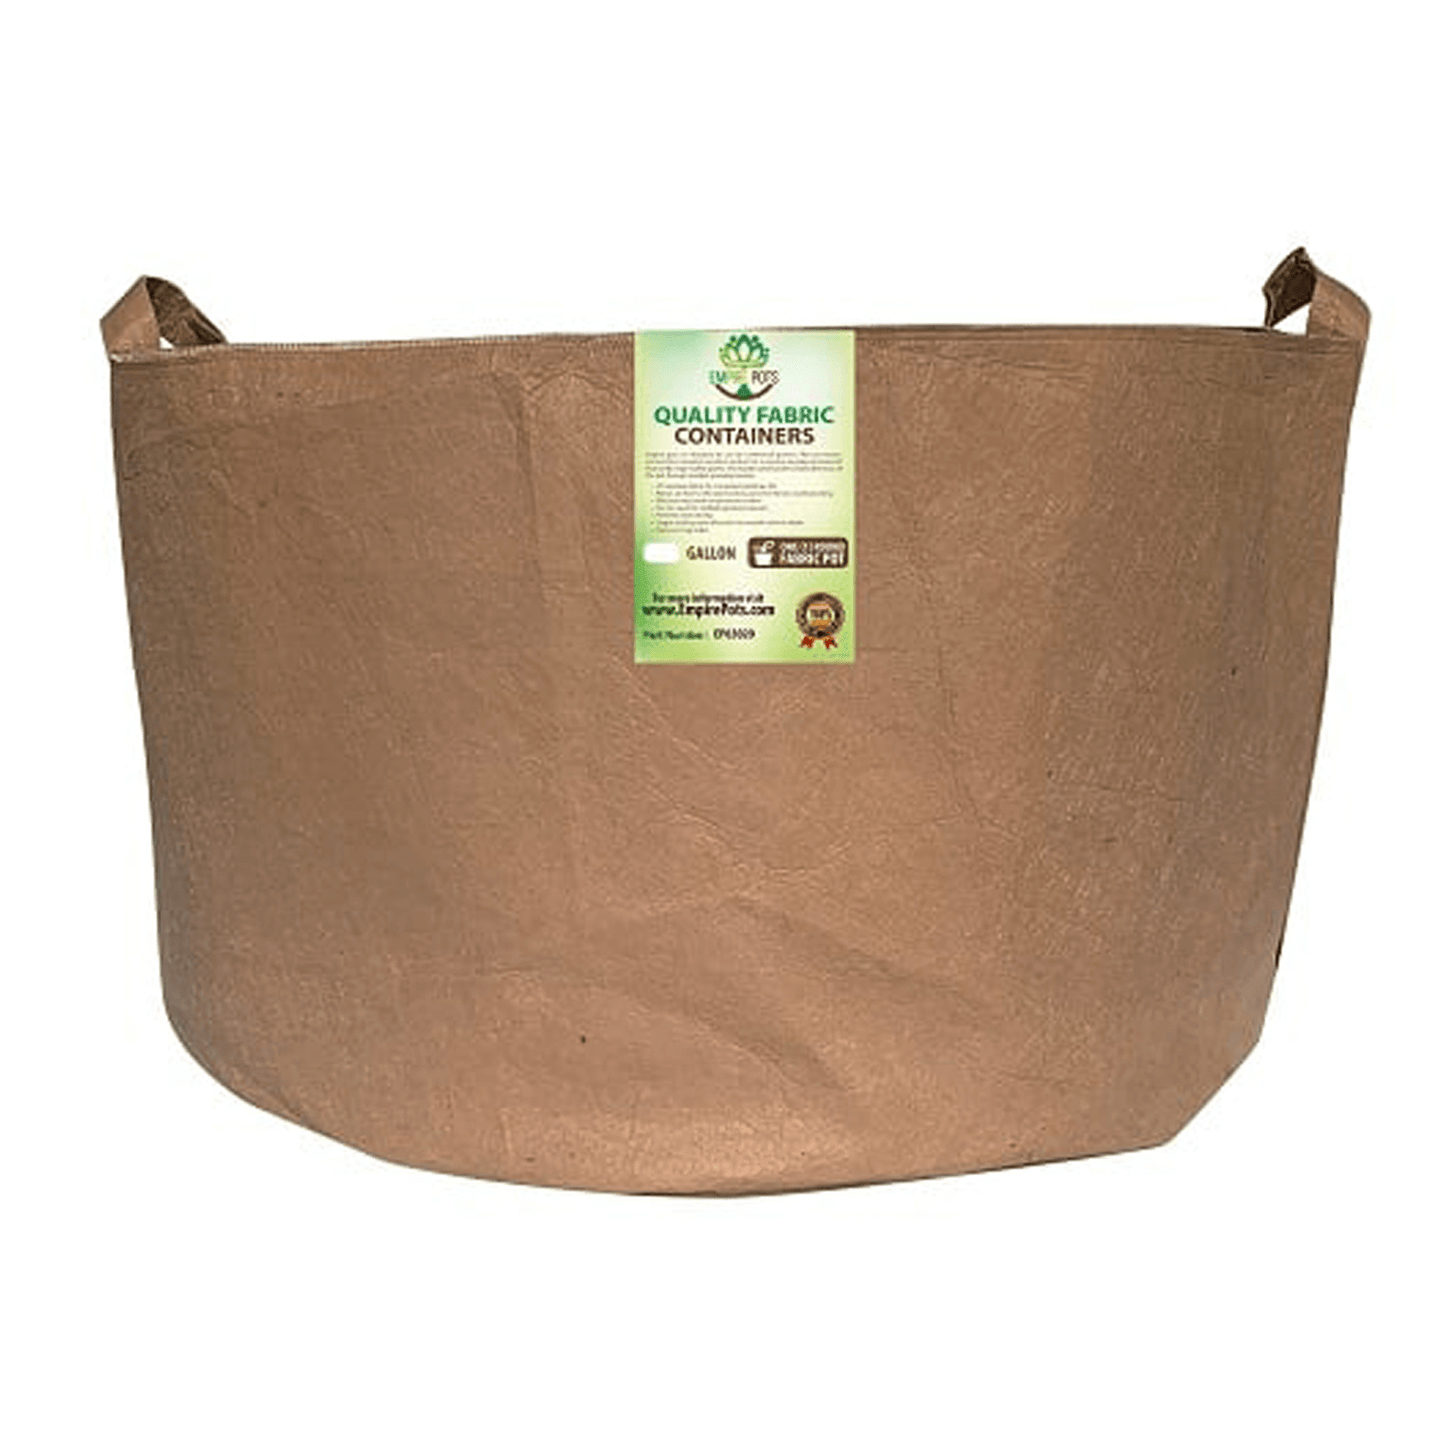 Empire Pots Premium 65 Gallon Fabric Pots with Full Wrap Handles - Case of 35 EP63065 Planting & Watering